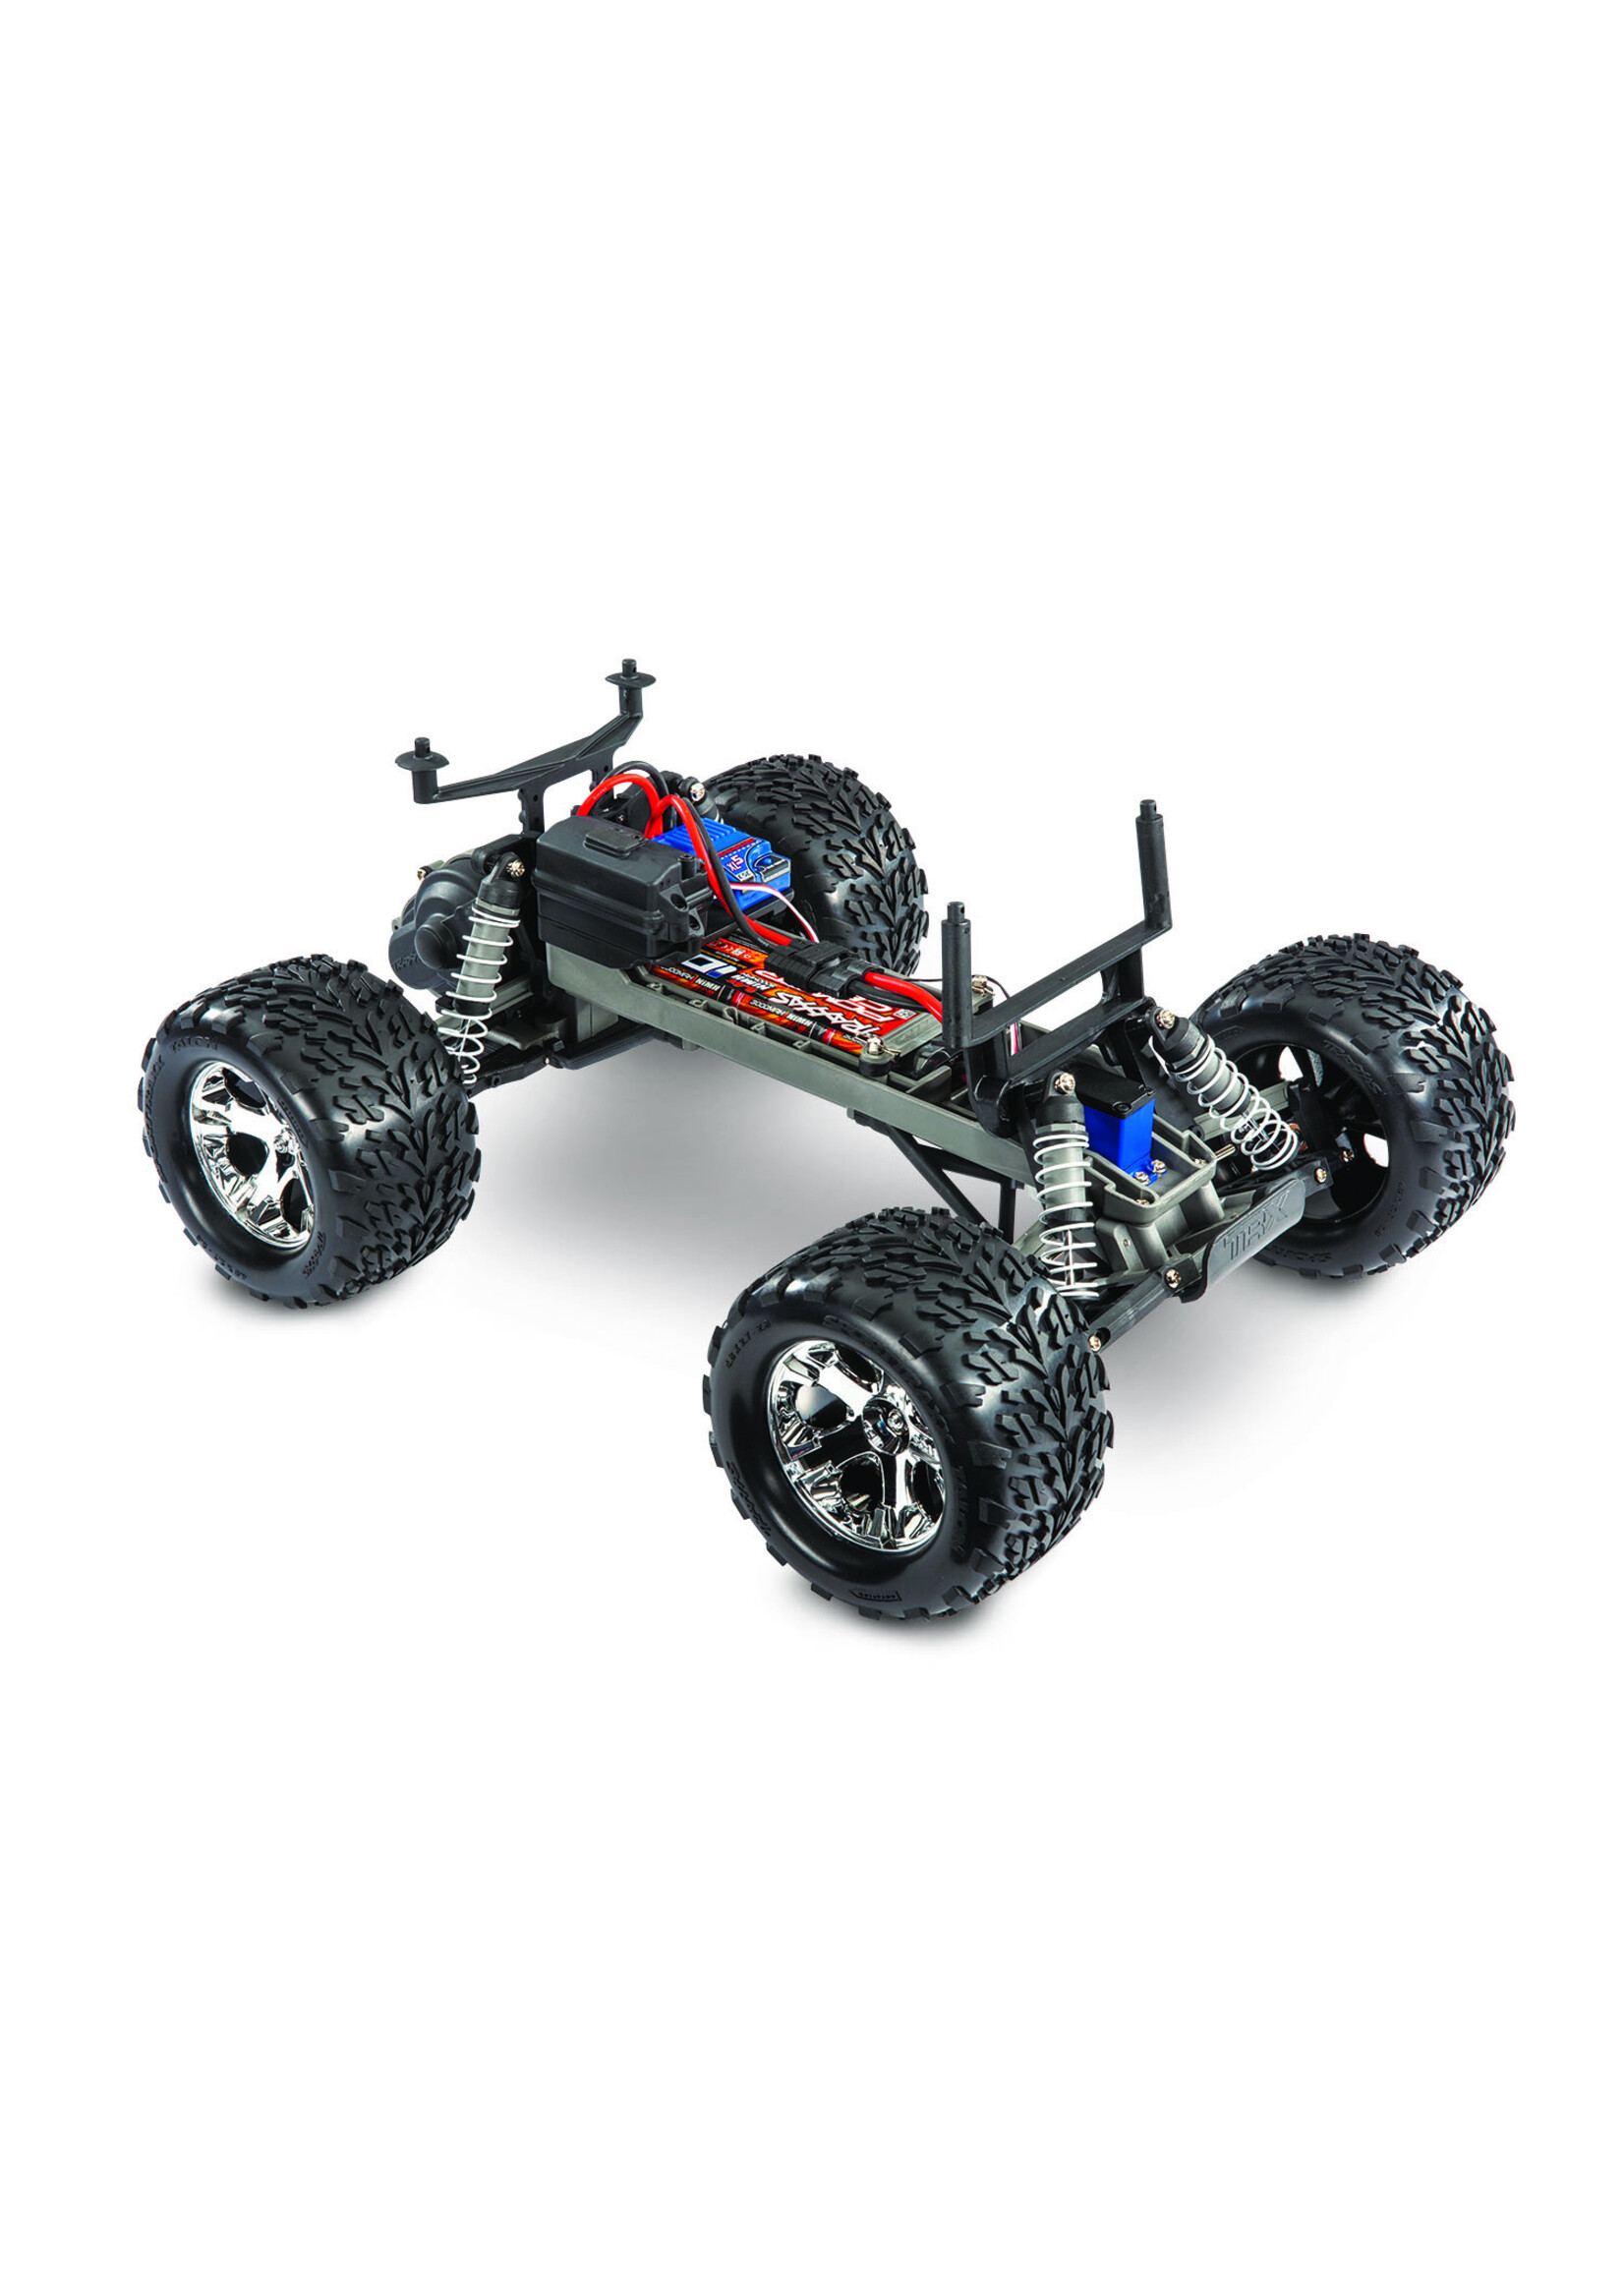 Traxxas 1/10 Stampede Monster Truck With USB-C Charger - Green